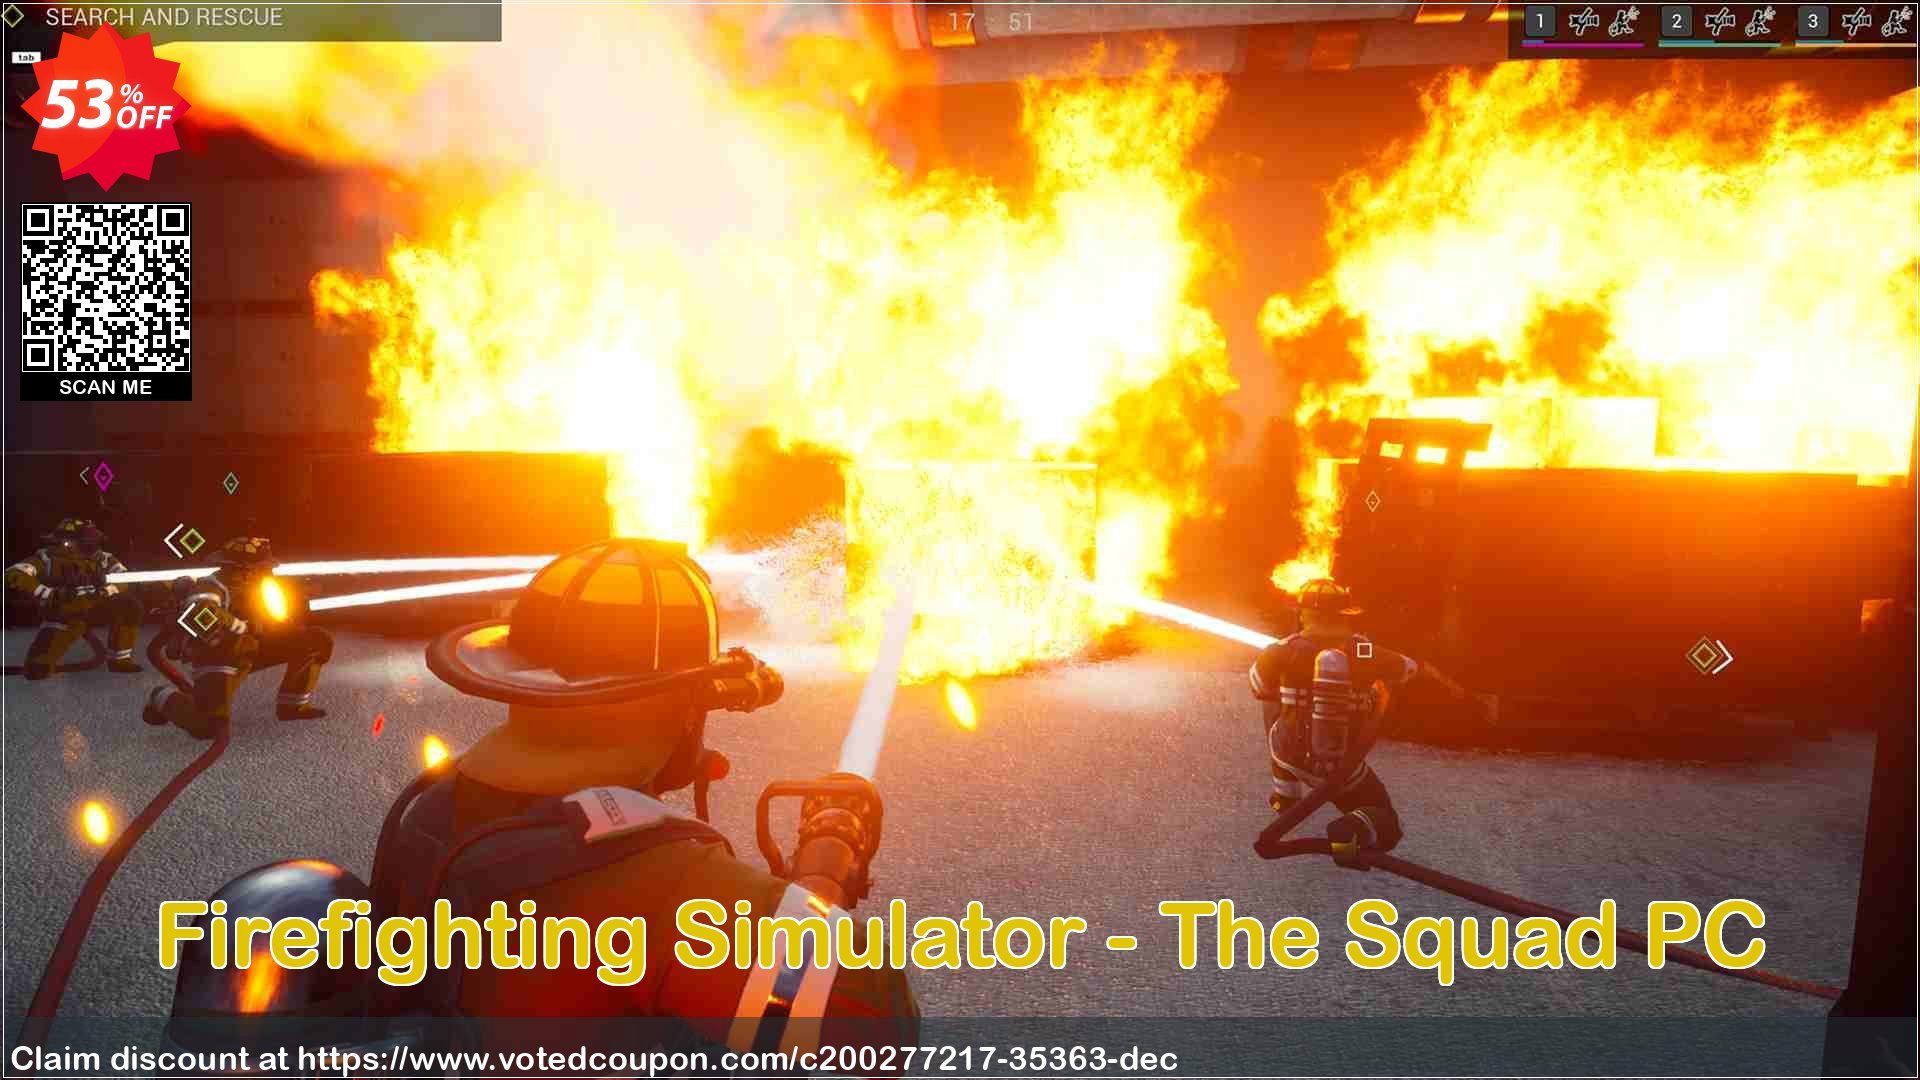 Firefighting Simulator - The Squad PC Coupon Code Apr 2024, 53% OFF - VotedCoupon